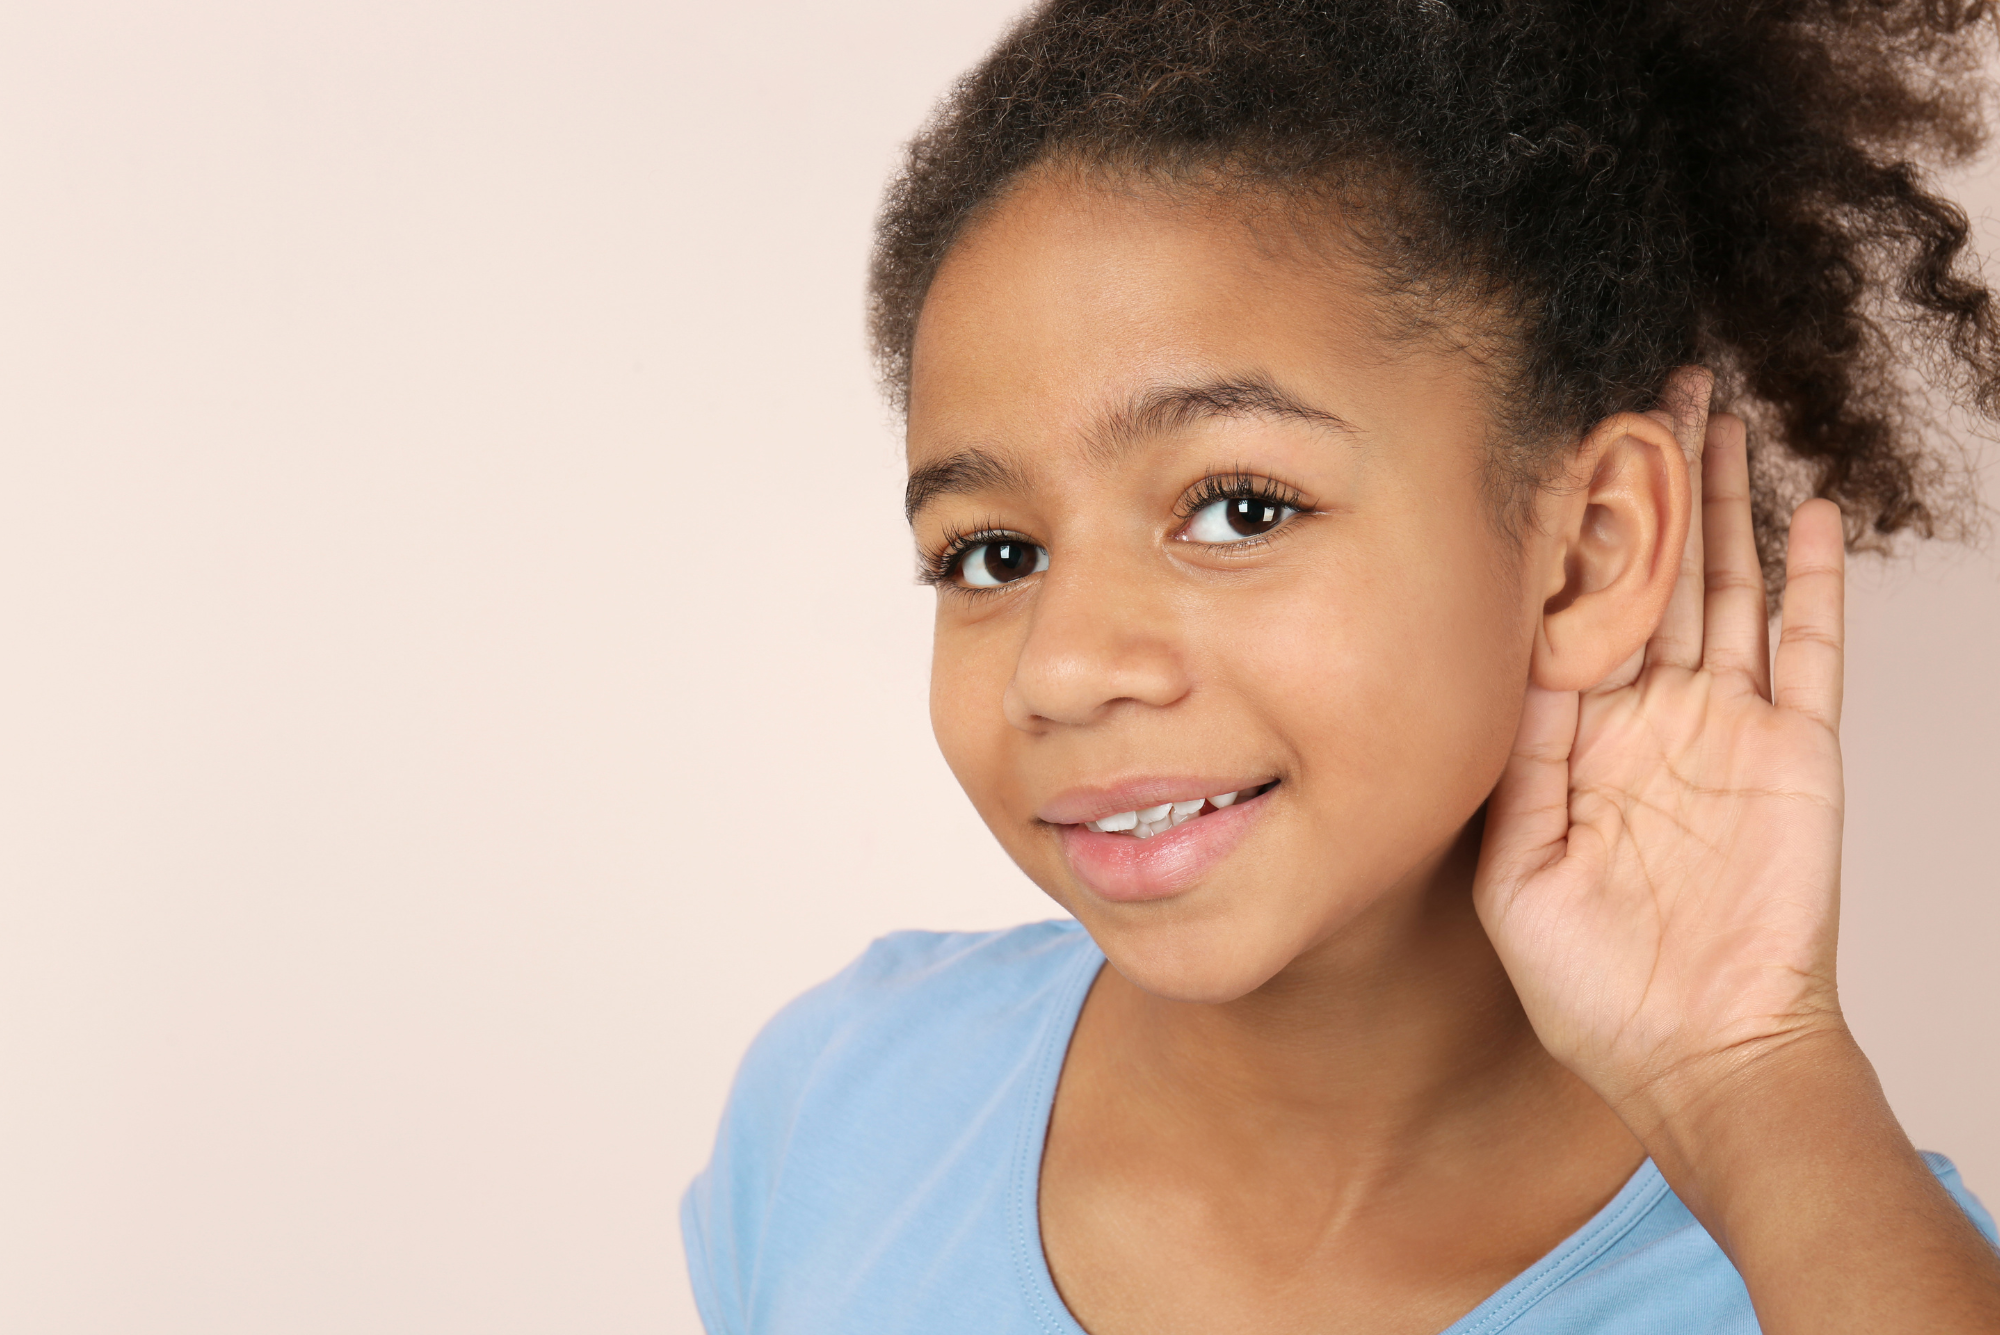 A young girl in a blue shirt holds her hand behind her ear in a listening position, representing ear tubes and adenoid removal.